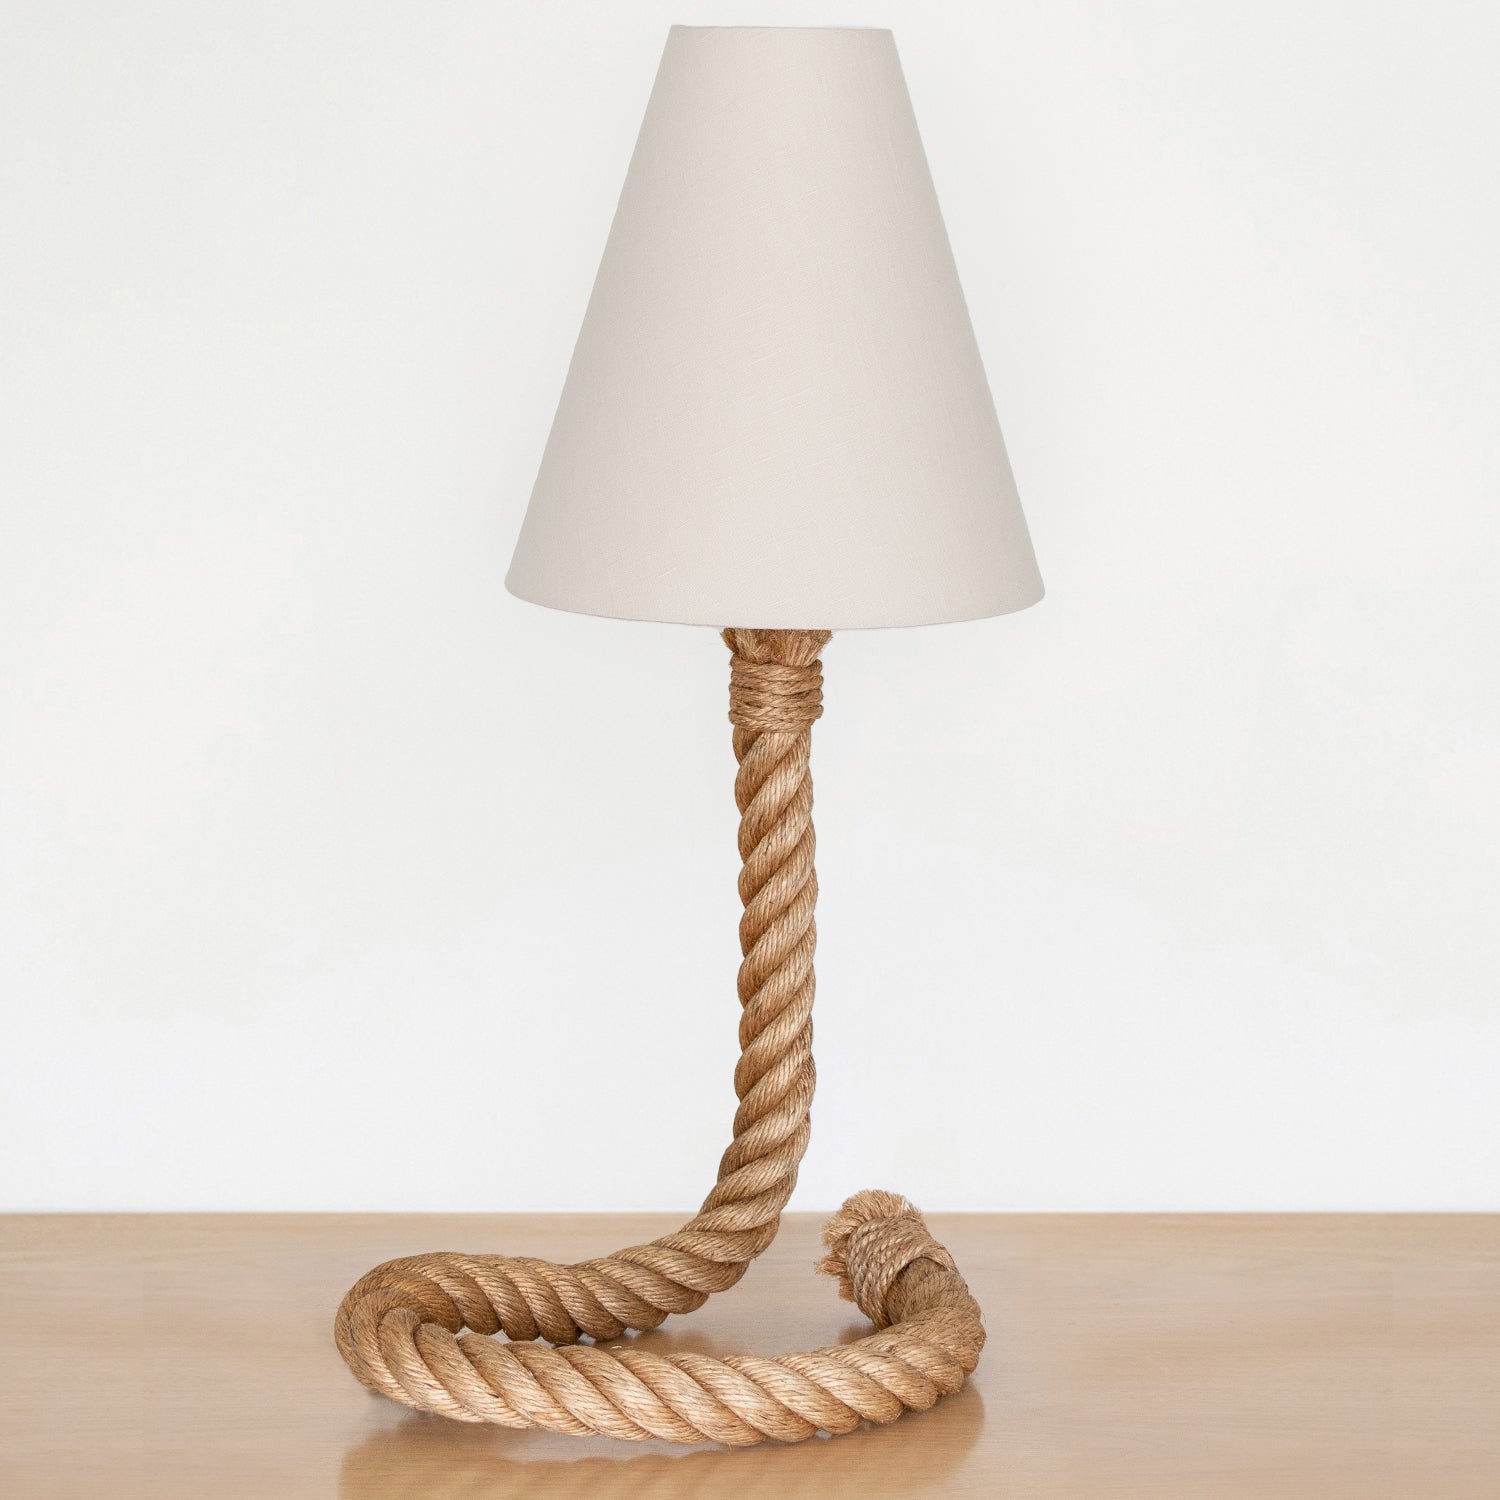 Incredible large rope table lamp by Adrien Audoux & Frida Minet, France, 1960s. Beautiful thick twisted rope with curved circular base and sculptural stem holding shade. New large linen tapered shade and newly re-wired. Two available and sold